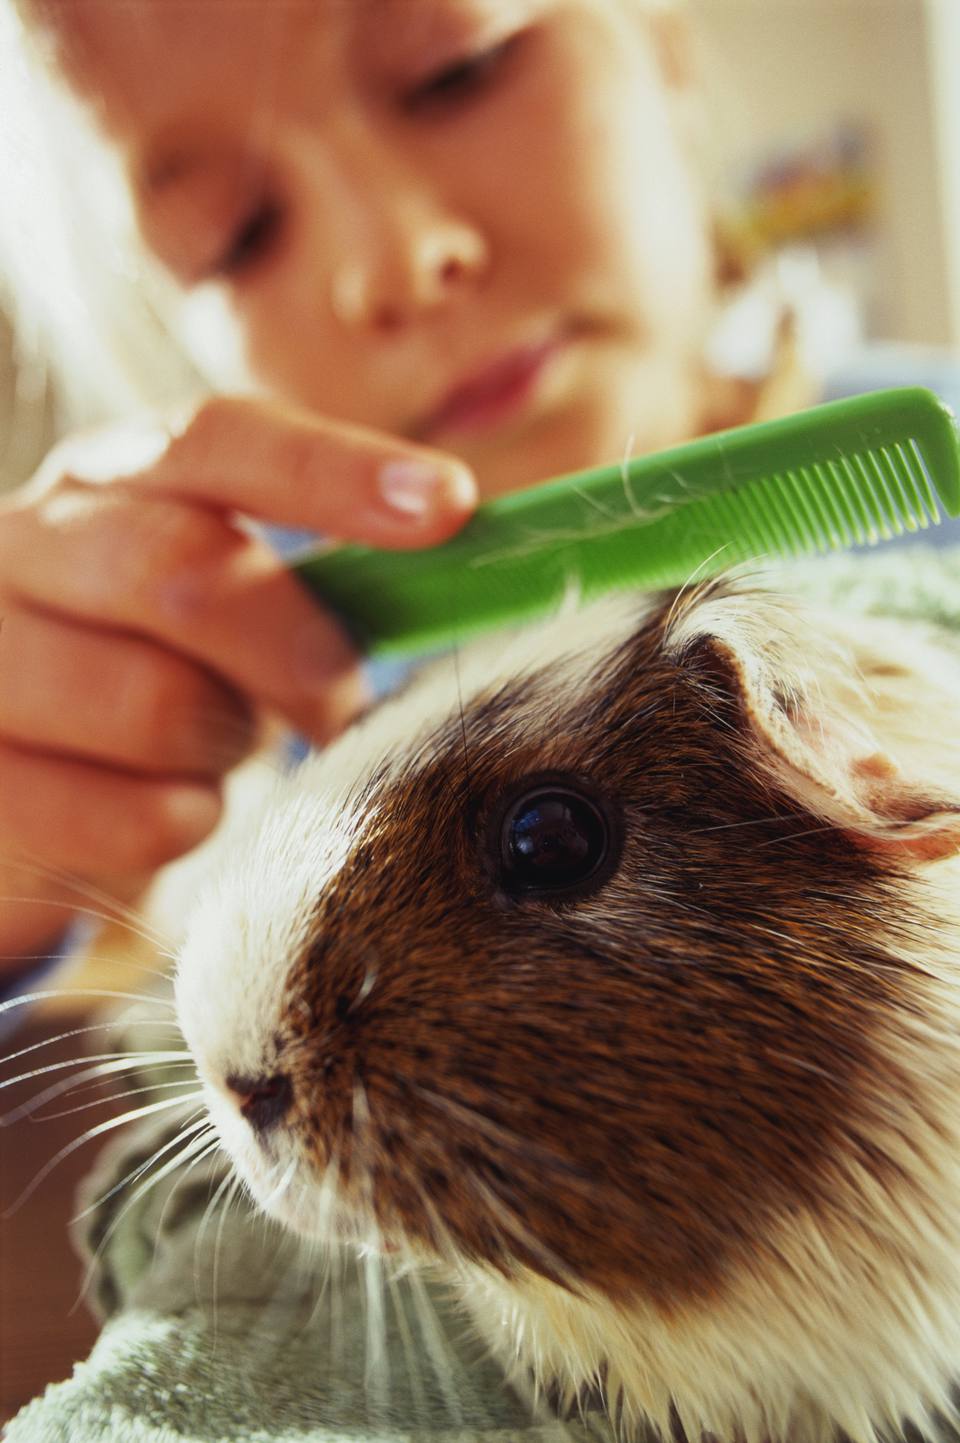 Young girl combing her guinea pig